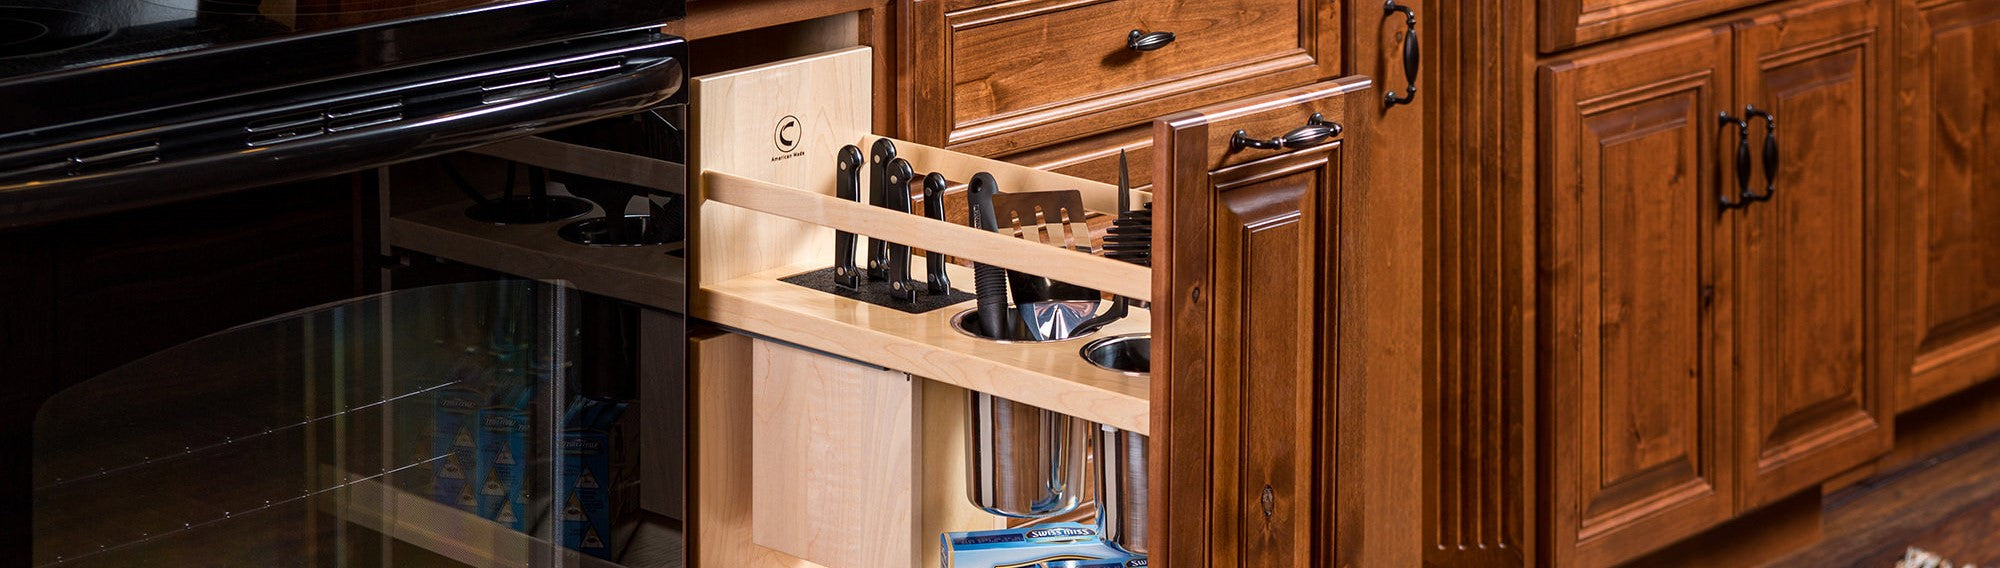 PULL-OUT CANISTER ORGANIZERS WITH KNIFE BLOCK